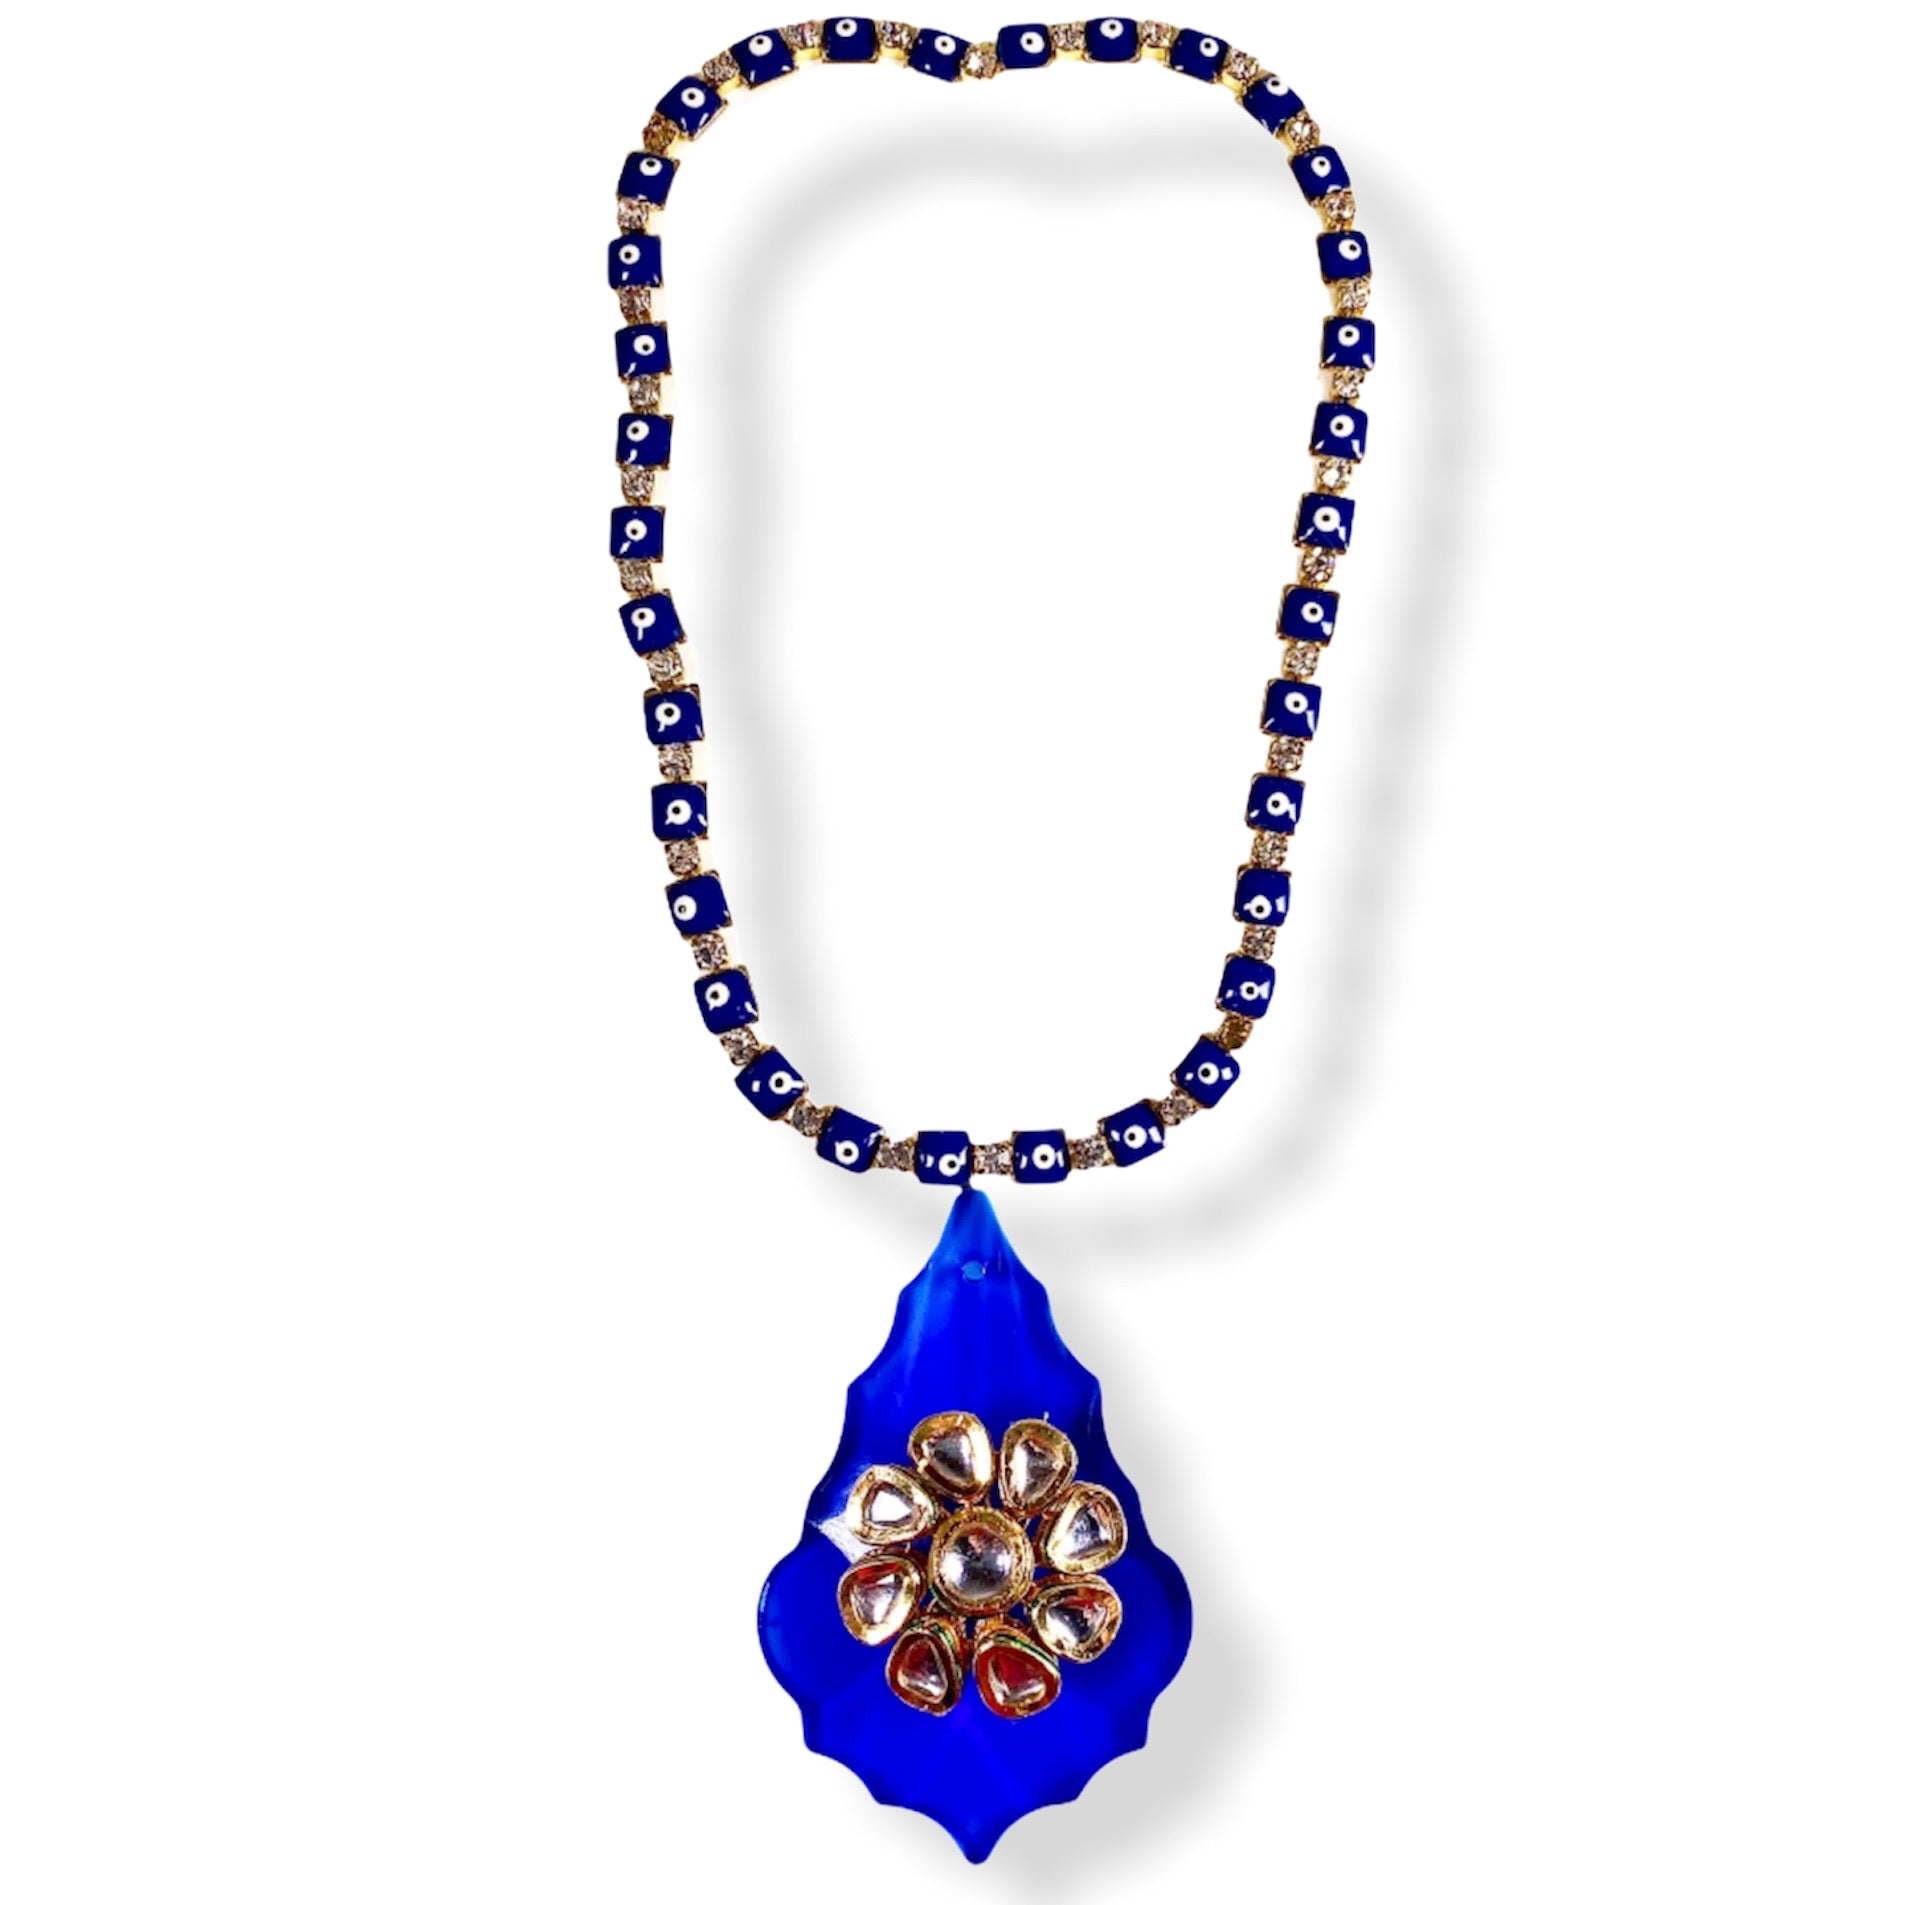 The Royals evil eye necklace